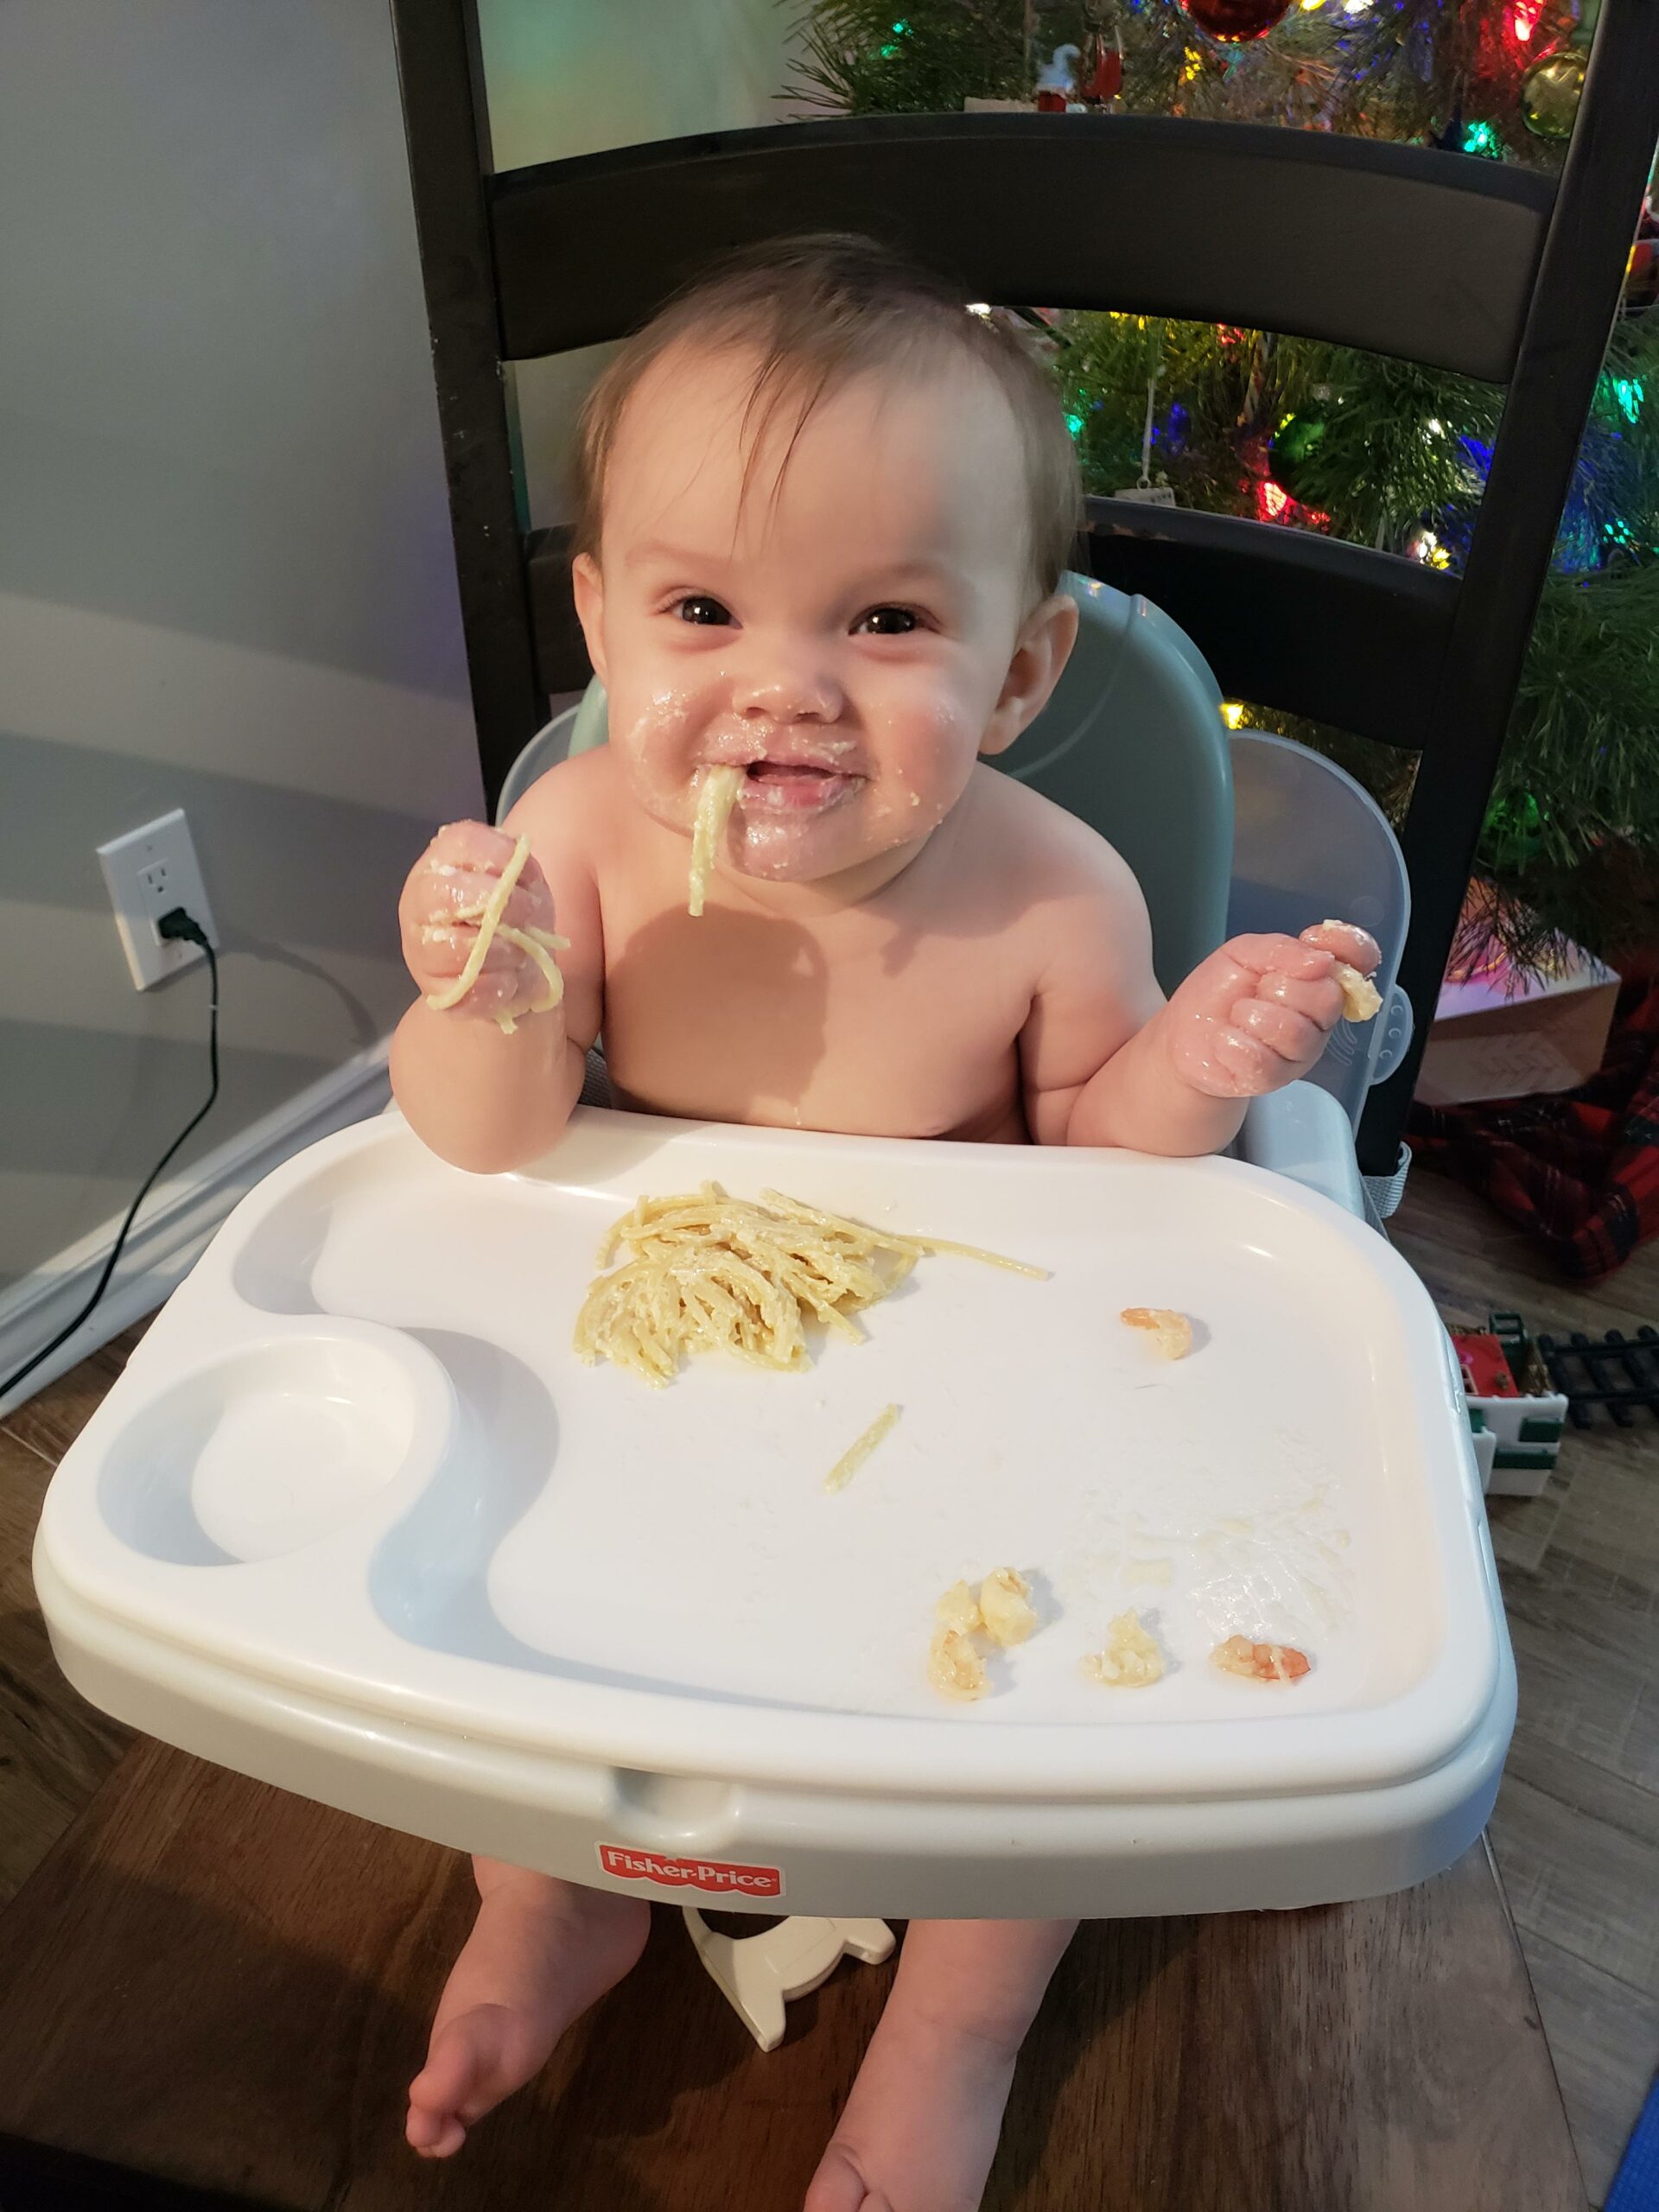 How do I give my 8 month old spaghetti